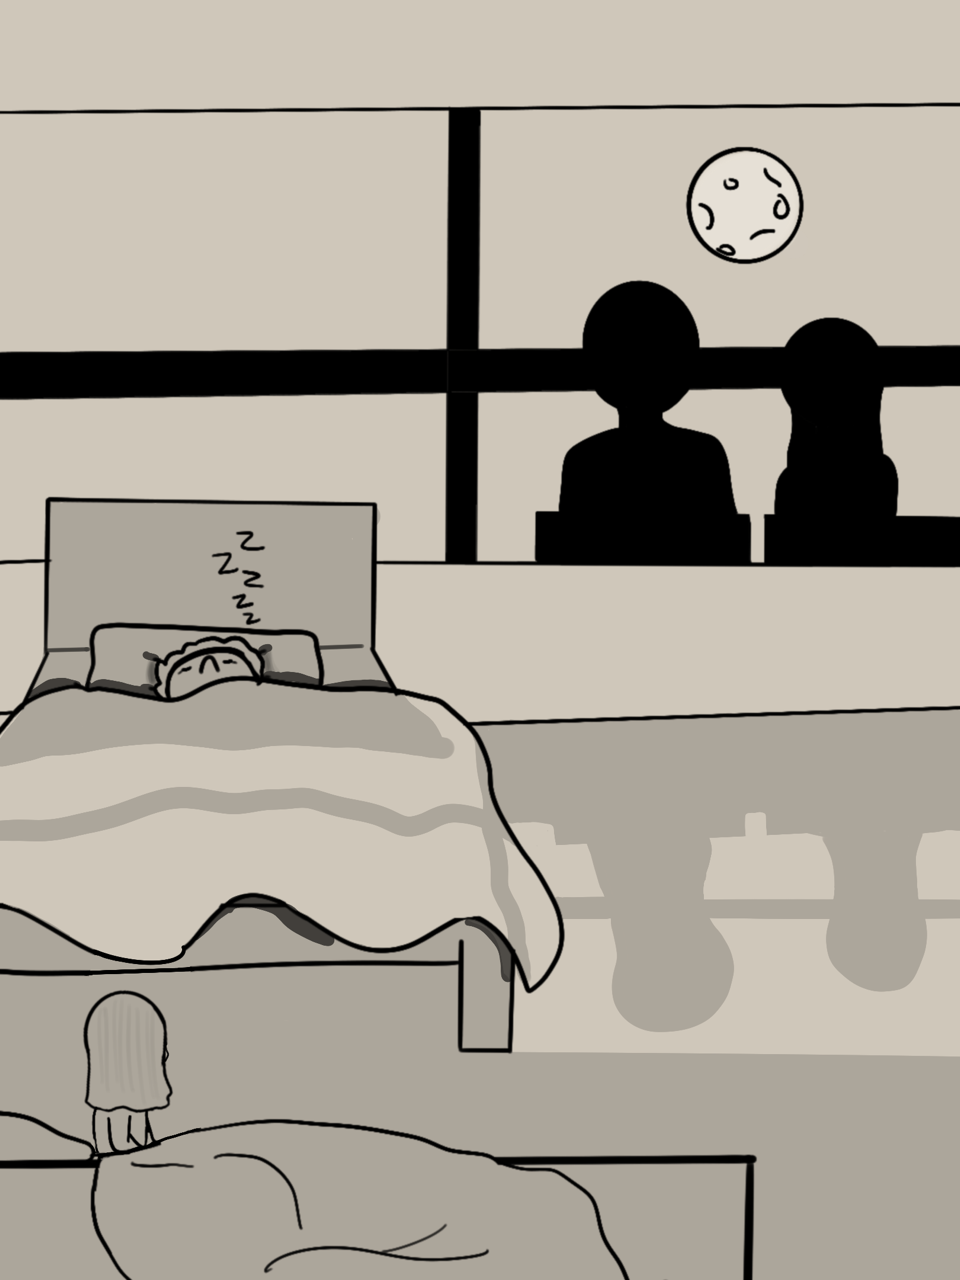 Girl sitting in bed looking at silhouettes of people outside while her grandmother sleeps.